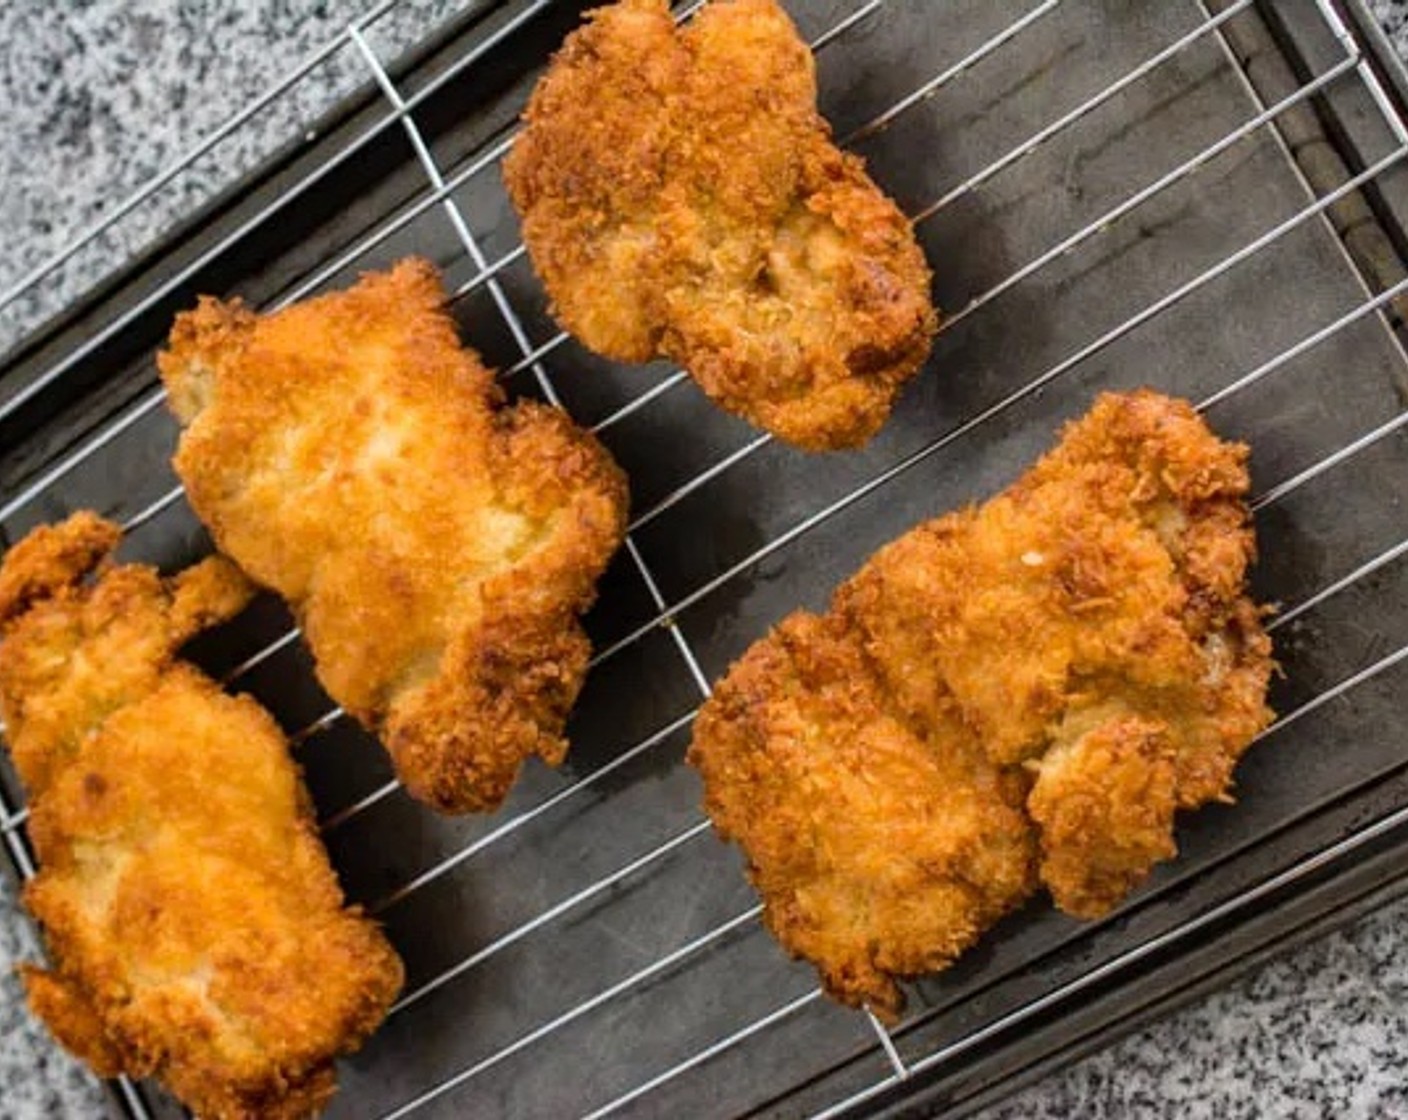 step 7 Place the fried chicken on a cooling rack over a baking sheet, or on oil-absorbing paper.